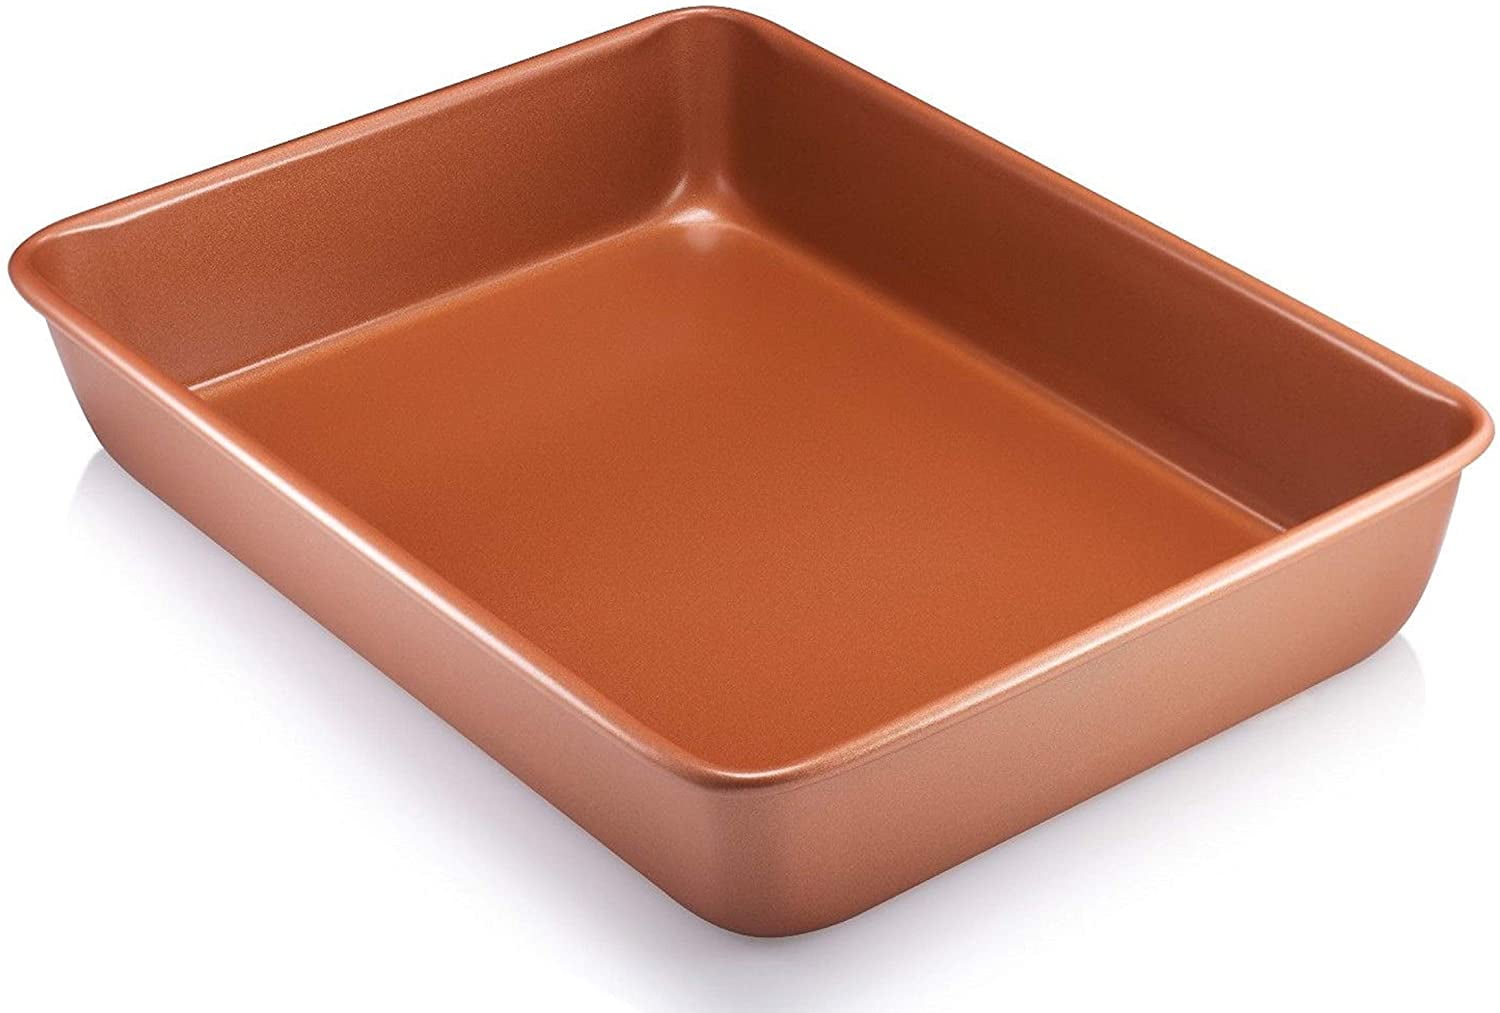 Gotham Steel 1389 Nonstick Copper Cookie Sheet and Jelly Roll Baking Pan  12 x 17 - 1 PACK, Brown